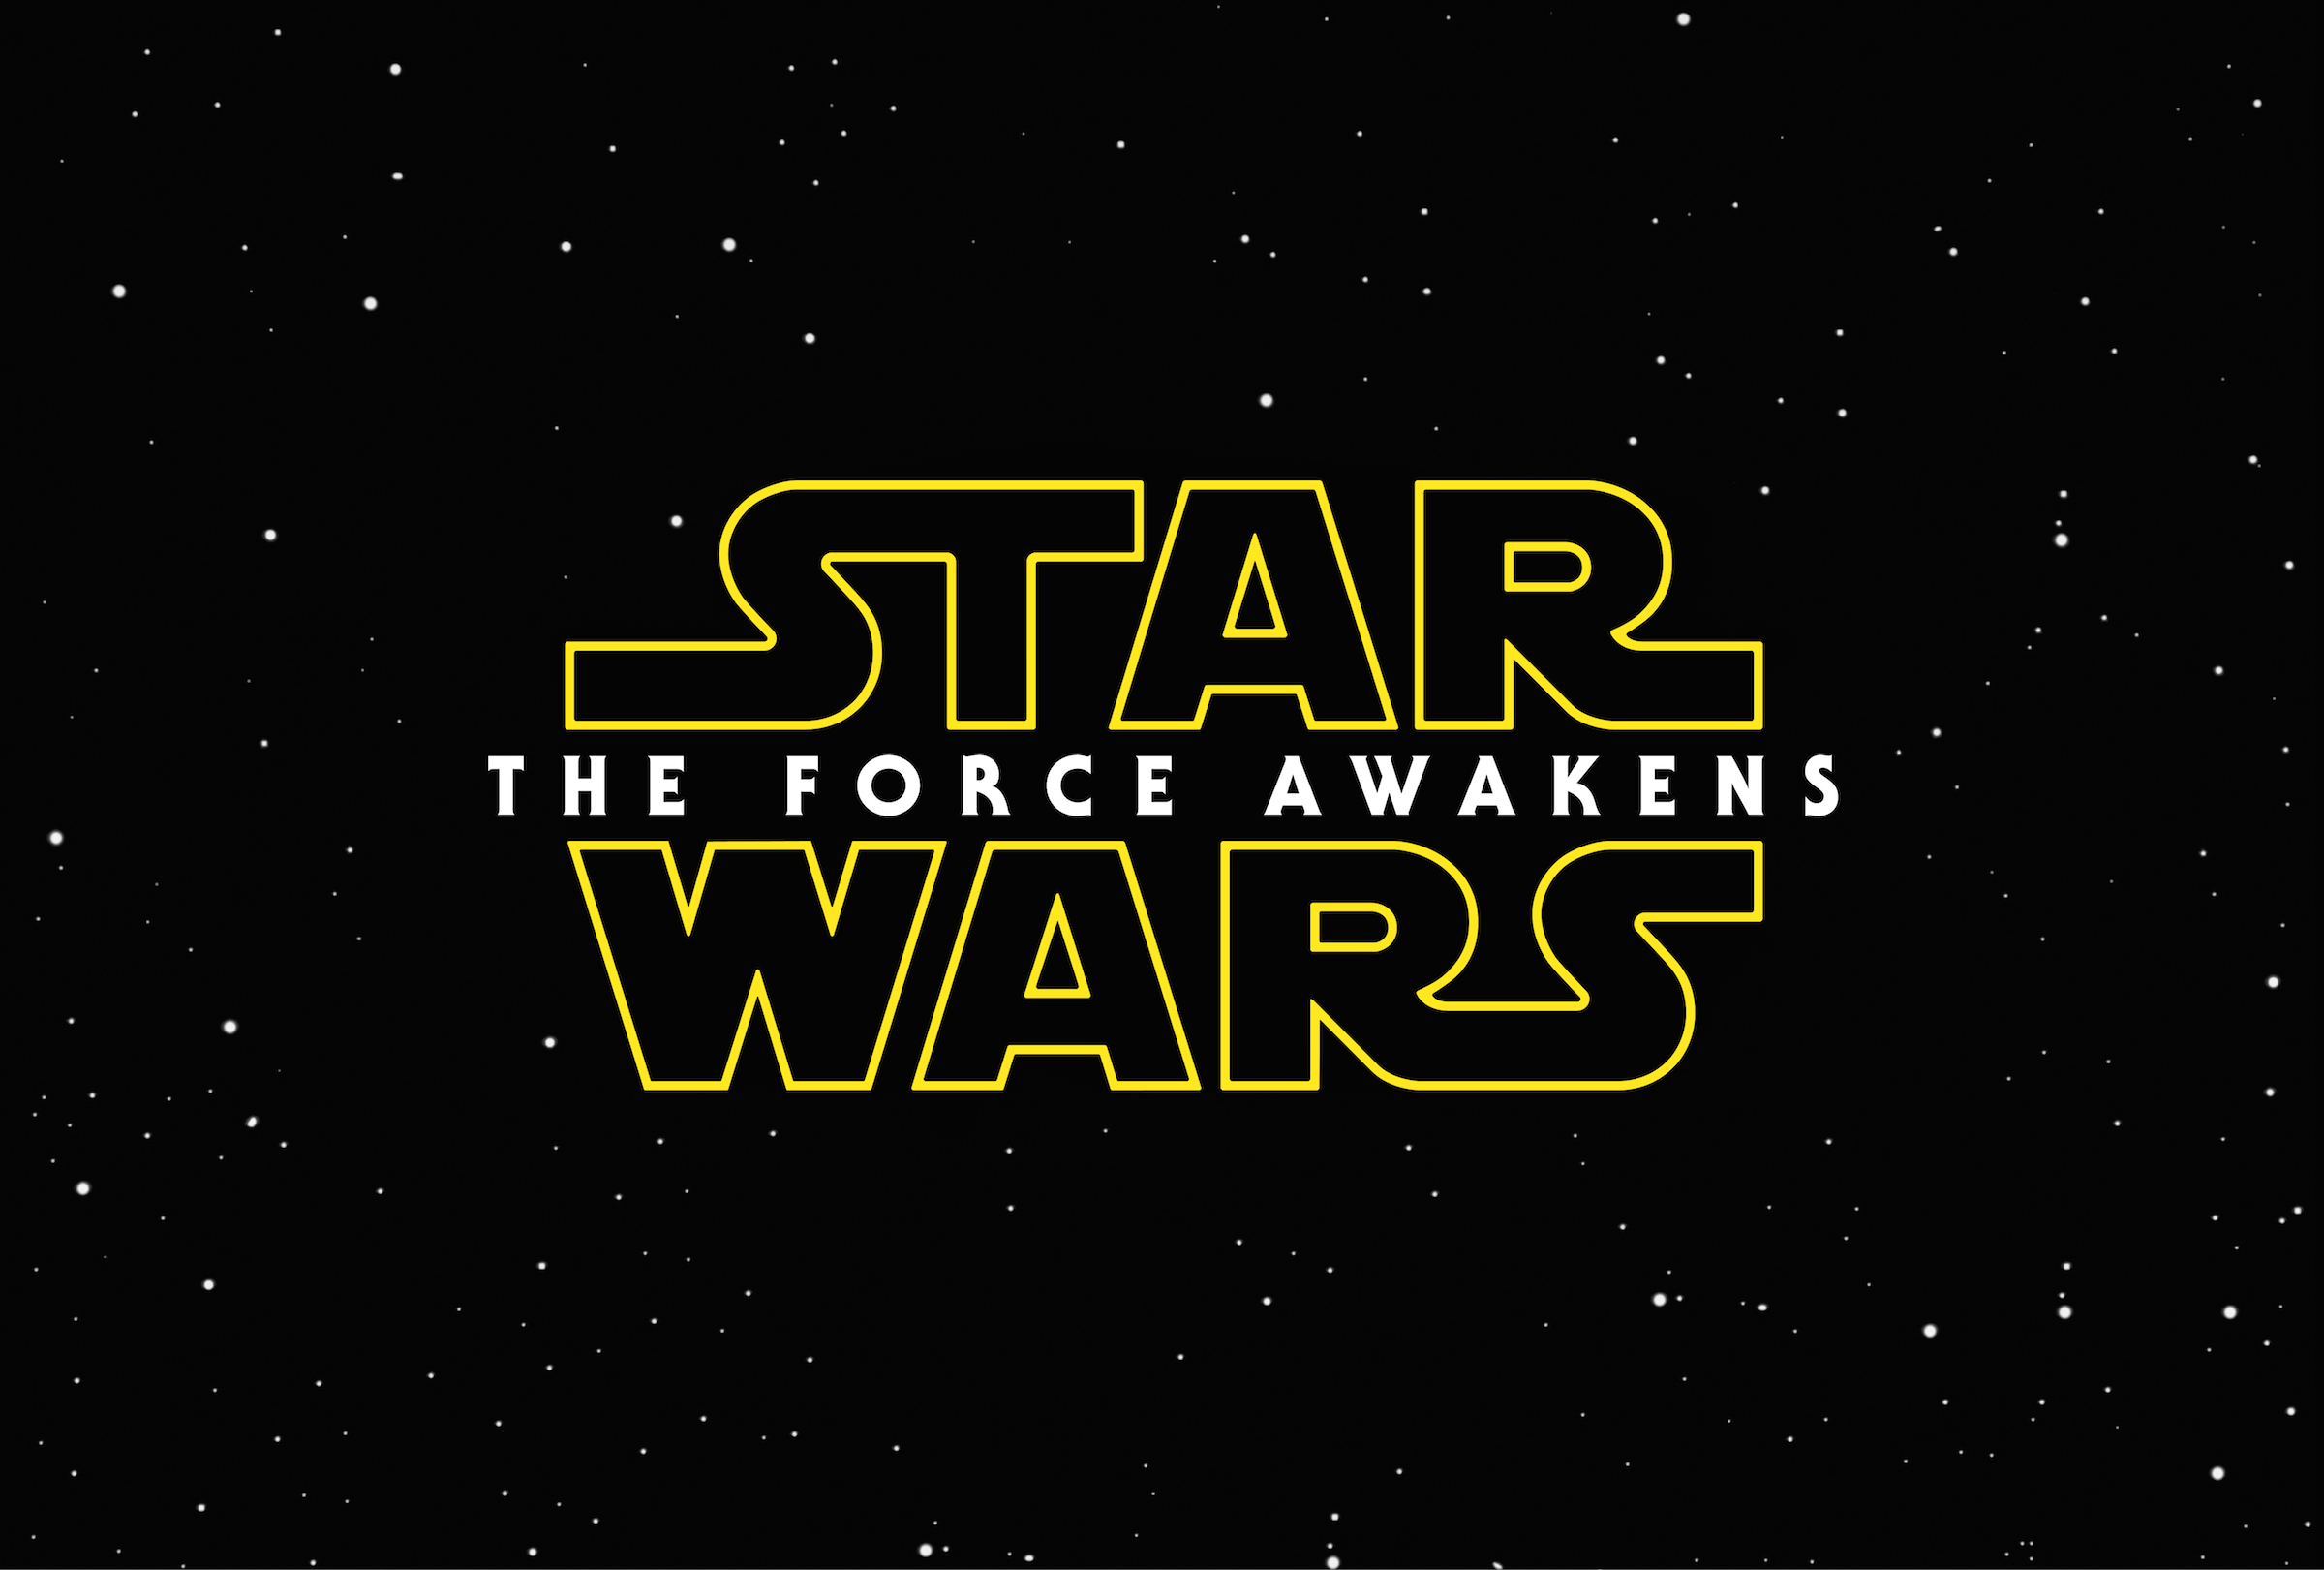 Revisit Stars Wars score in The Force Awakens countdown Daily Trojan